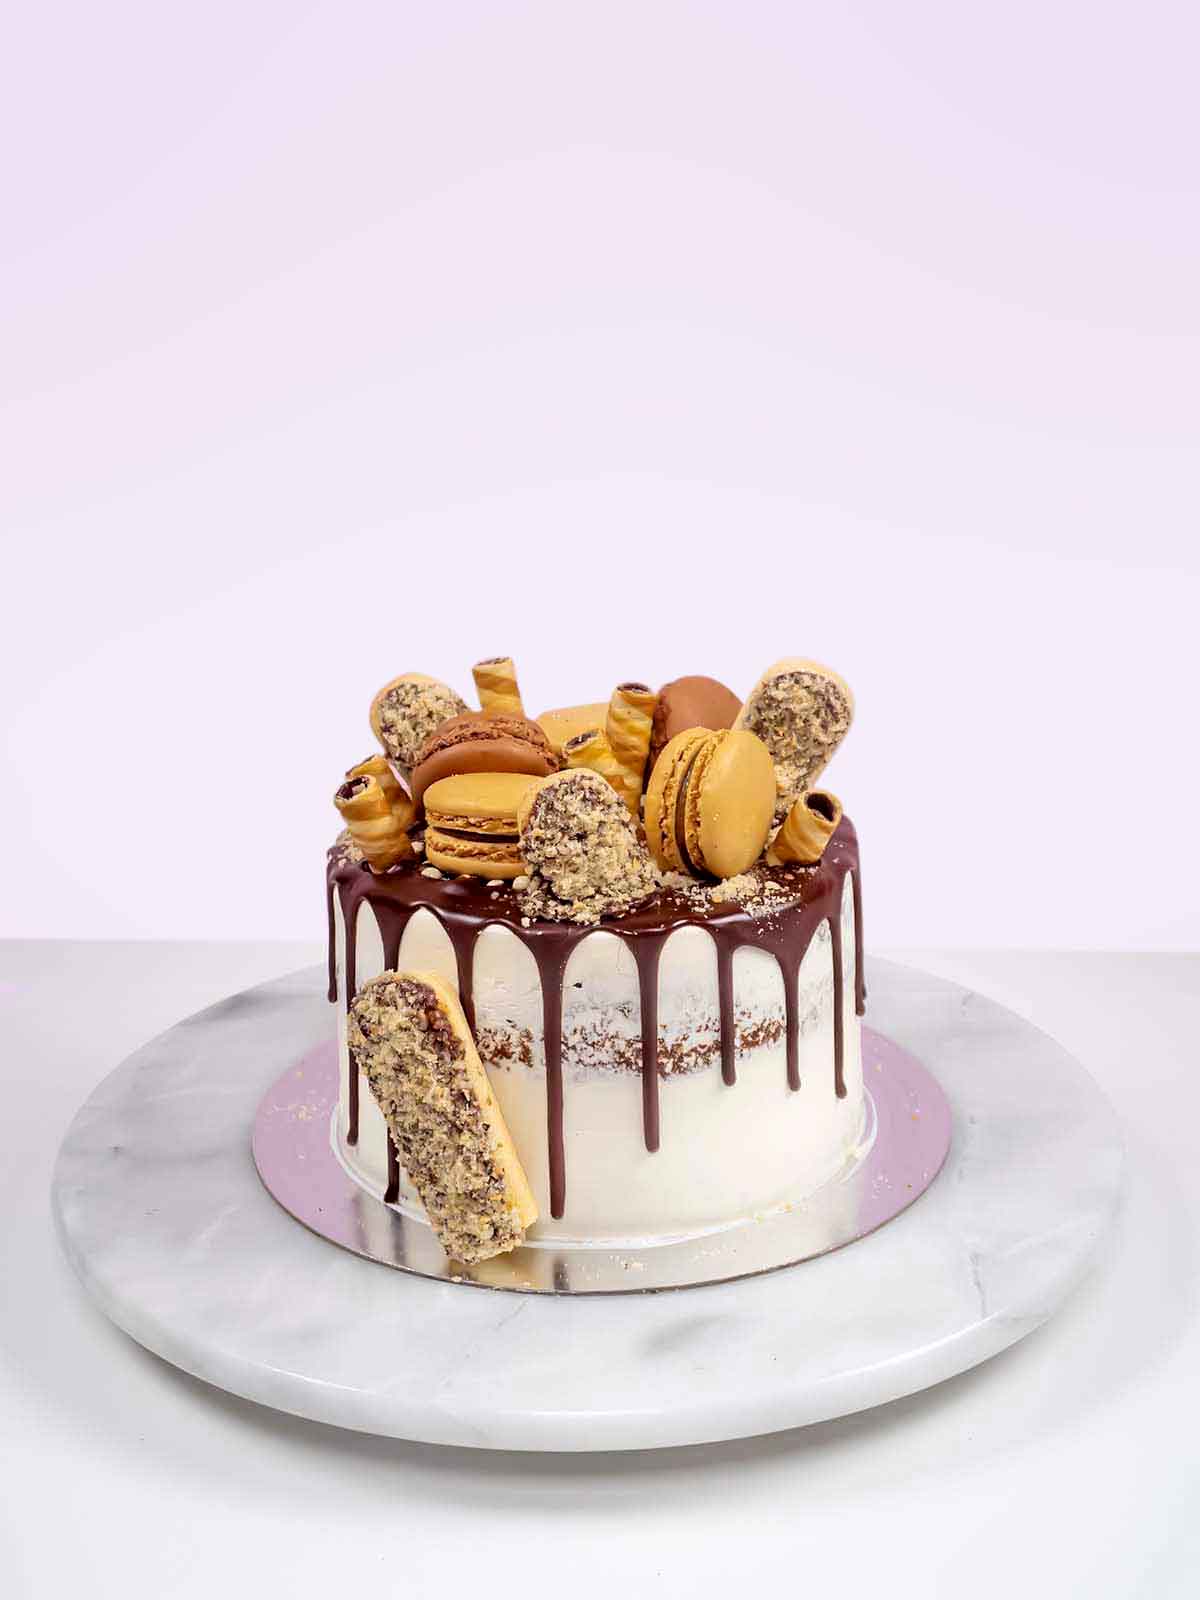 Desserts Delivered Bakery | Birthday Cake Delivery UK | Cakes Near Me